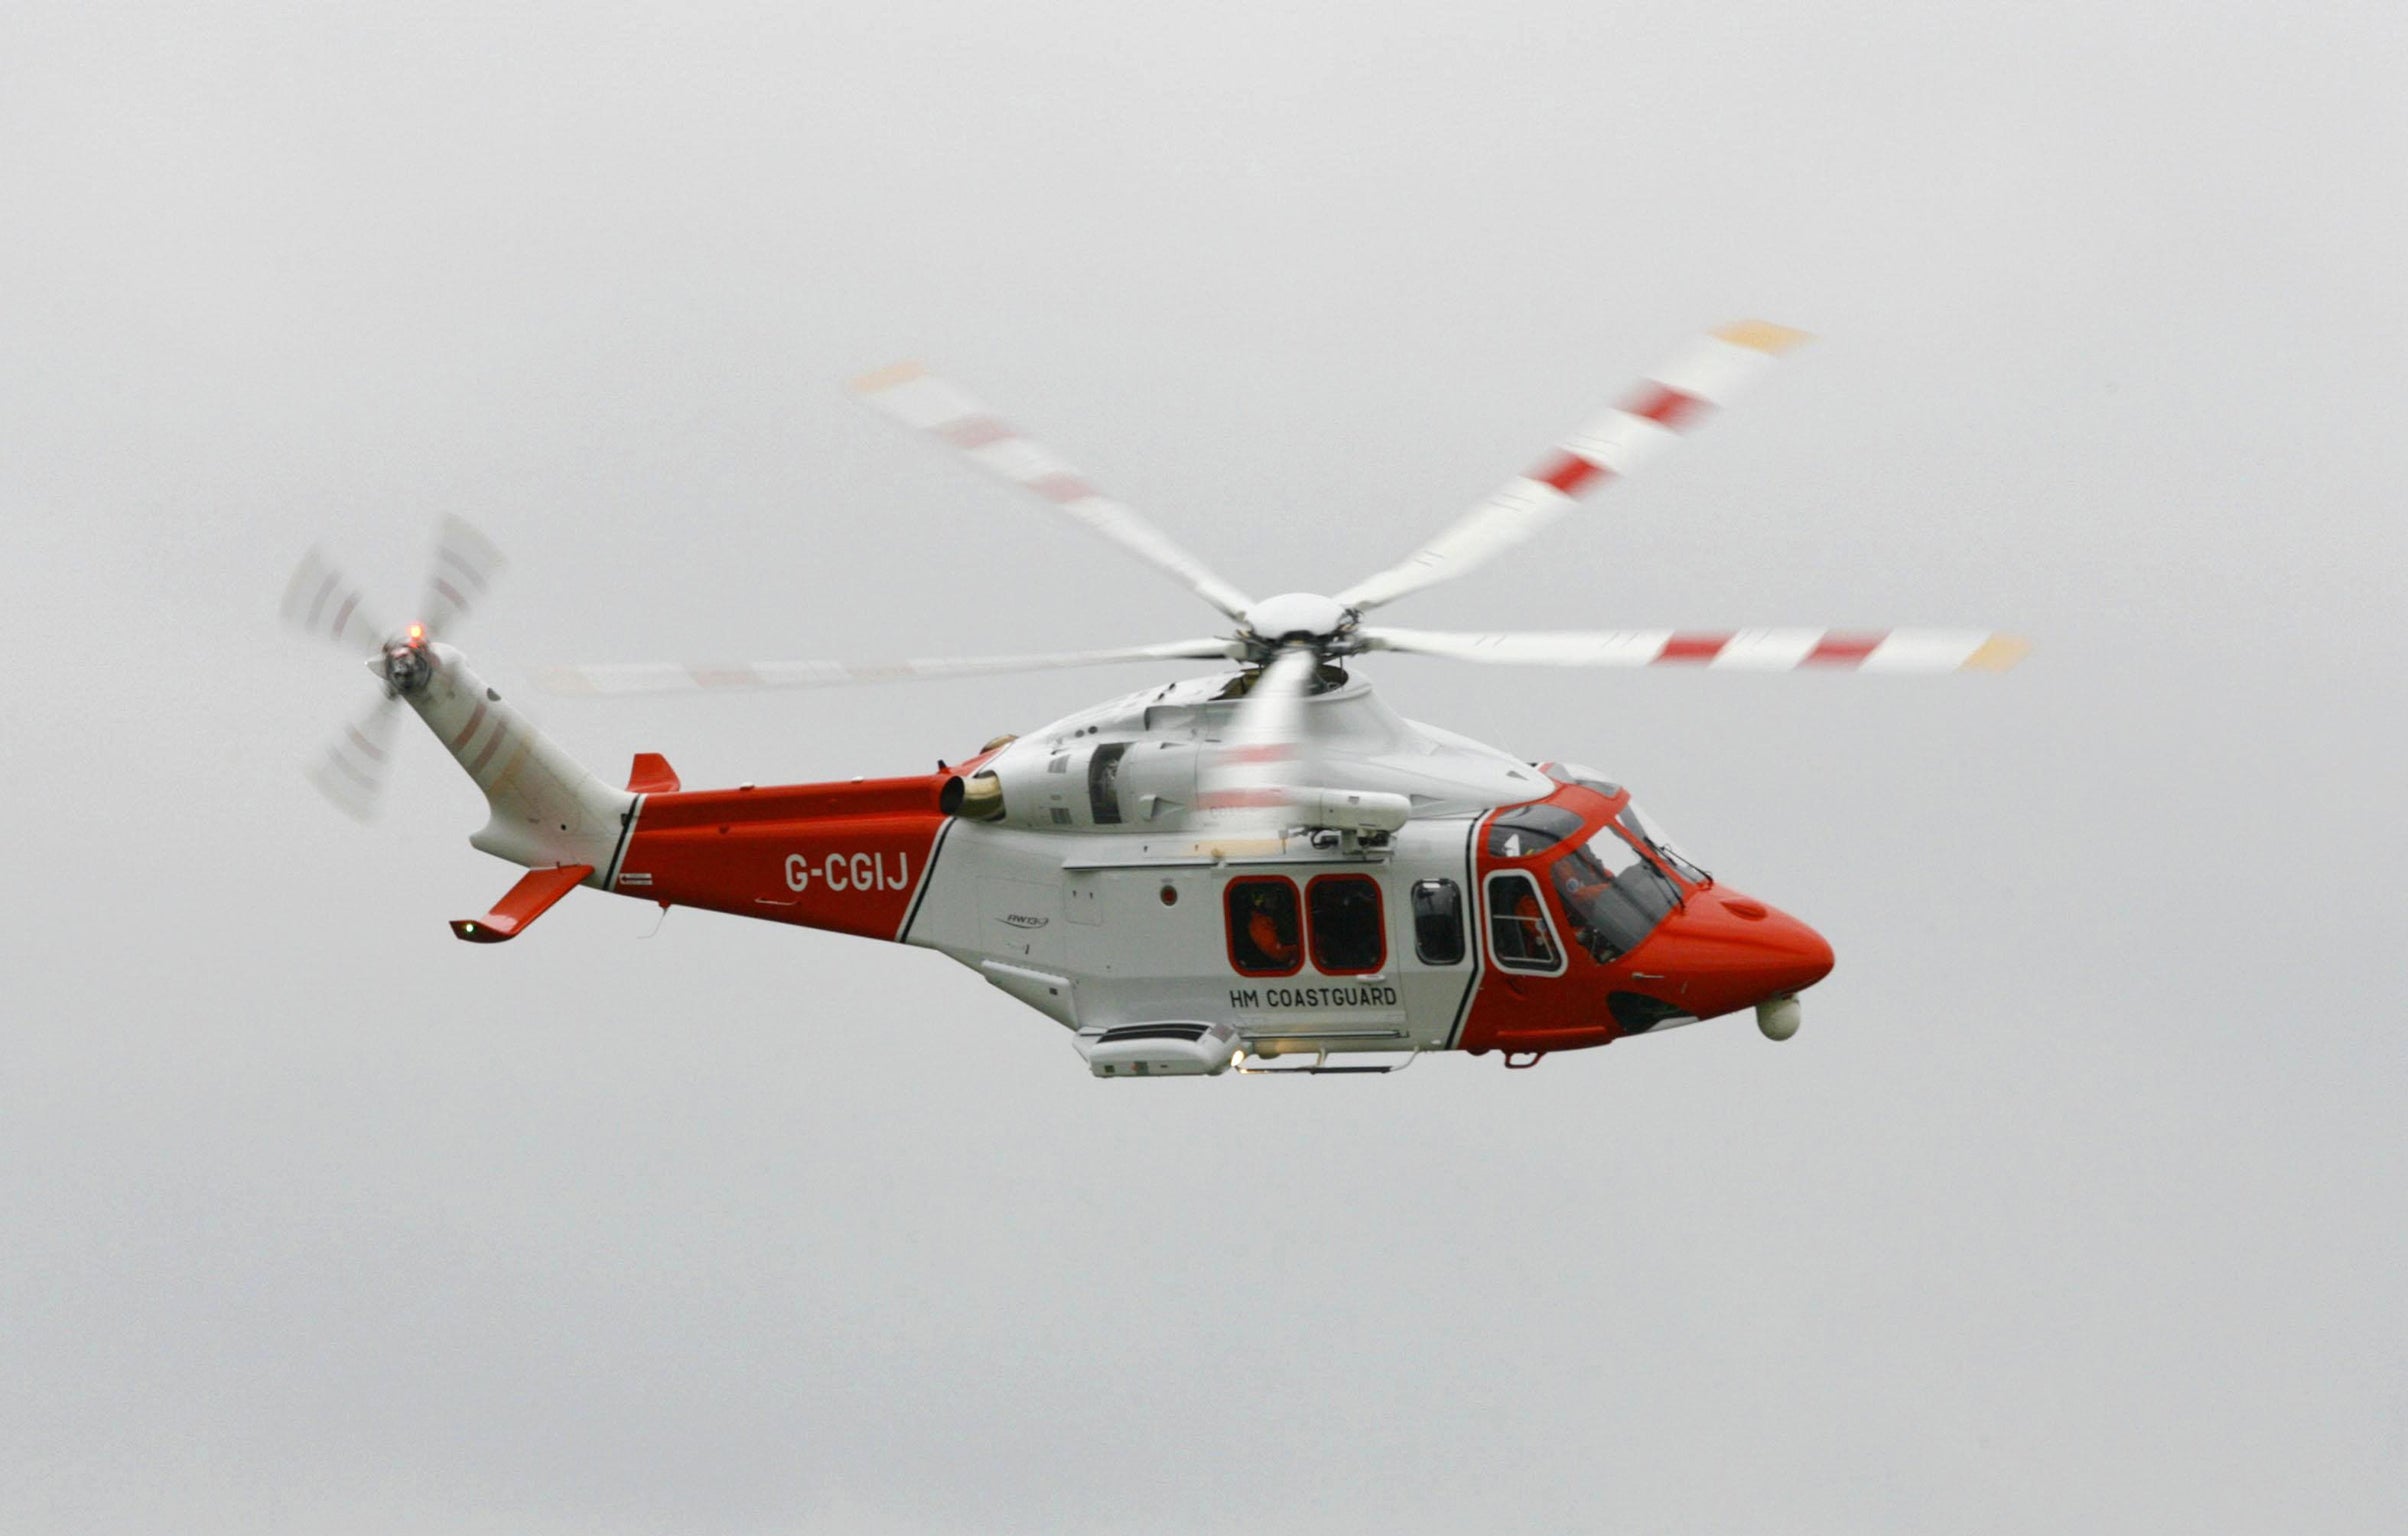 Search and rescue helicopters were dispatched to look for the crew